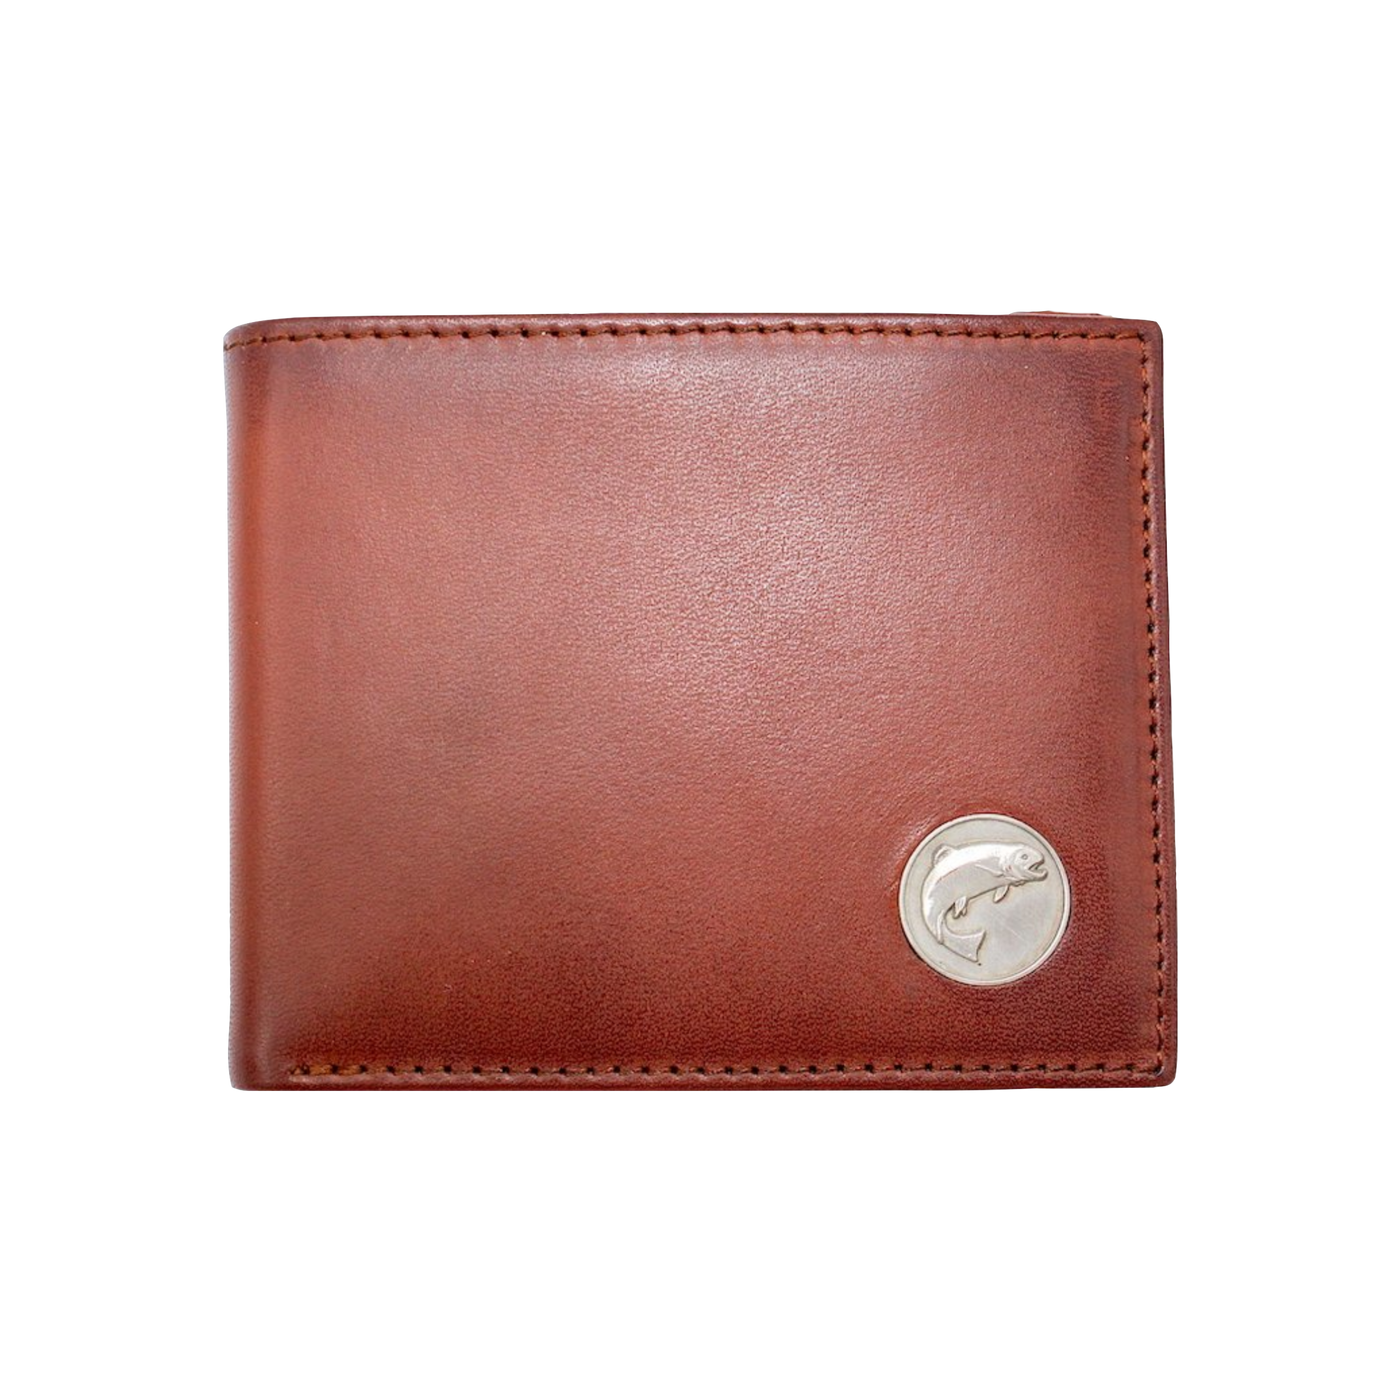 The Wildlife Bifold Trout Wallet, constructed from a beautiful hand-burnished, full grain leather, containing&nbsp;a personalized trout concho, will&nbsp;age with beauty.&nbsp; Look no further for your collection!&nbsp;&nbsp; 8 Card Slots 3 Storage Pockets 2 ID Windows Leather Tipped Bill Divider Weber's Signature Trout Concho Dimensions: 4.5"L x 3.5"H RFID Protection Color: Caramel